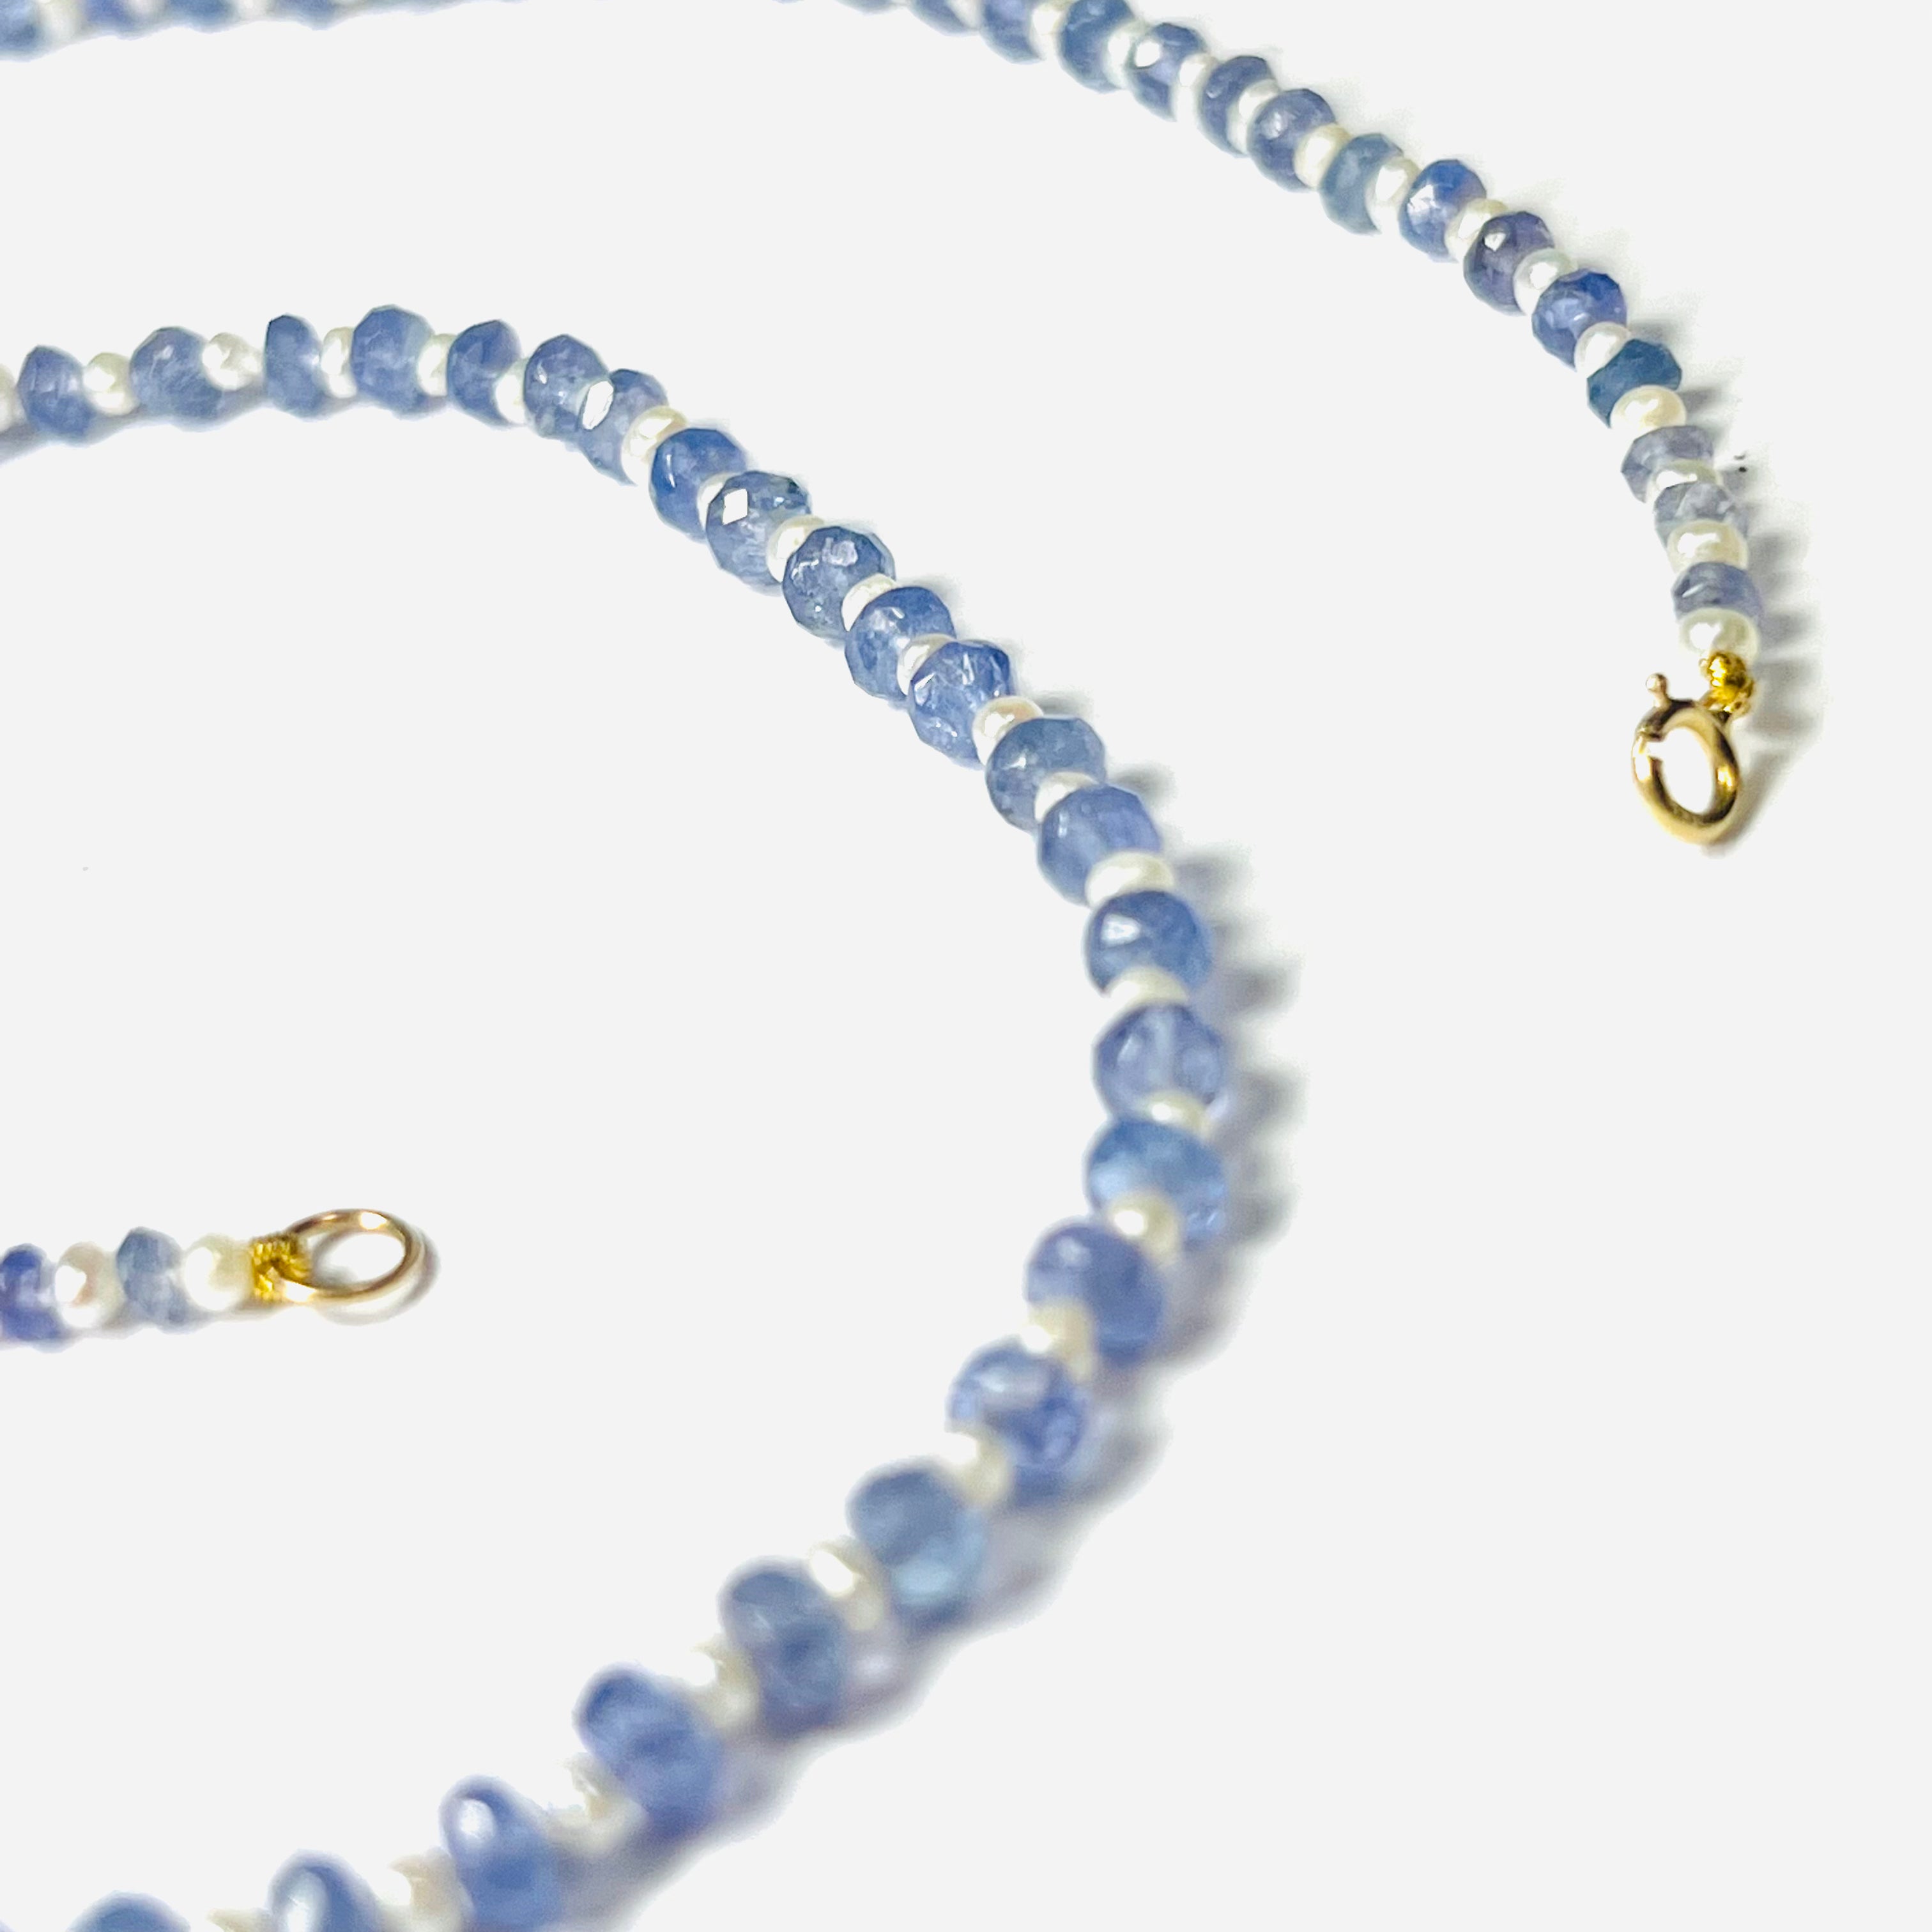 Briolette Tanzanite & Seed Pearl Beads 18" 14K Yellow Gold Necklace